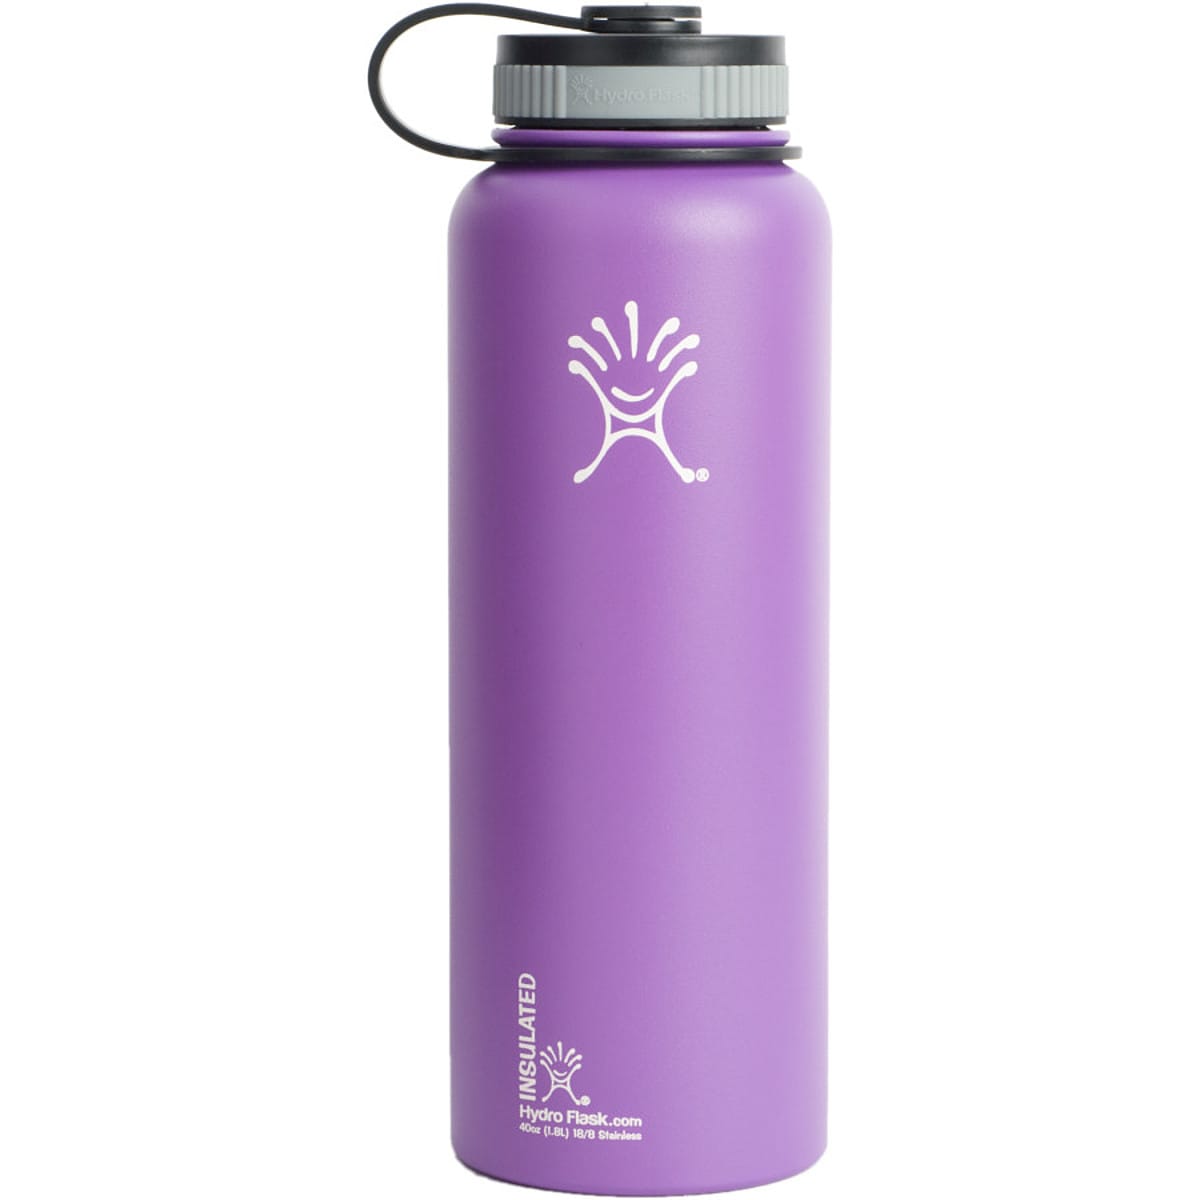 Hydro Flask 40oz. Wide Mouth Water Bottle - Hike & Camp